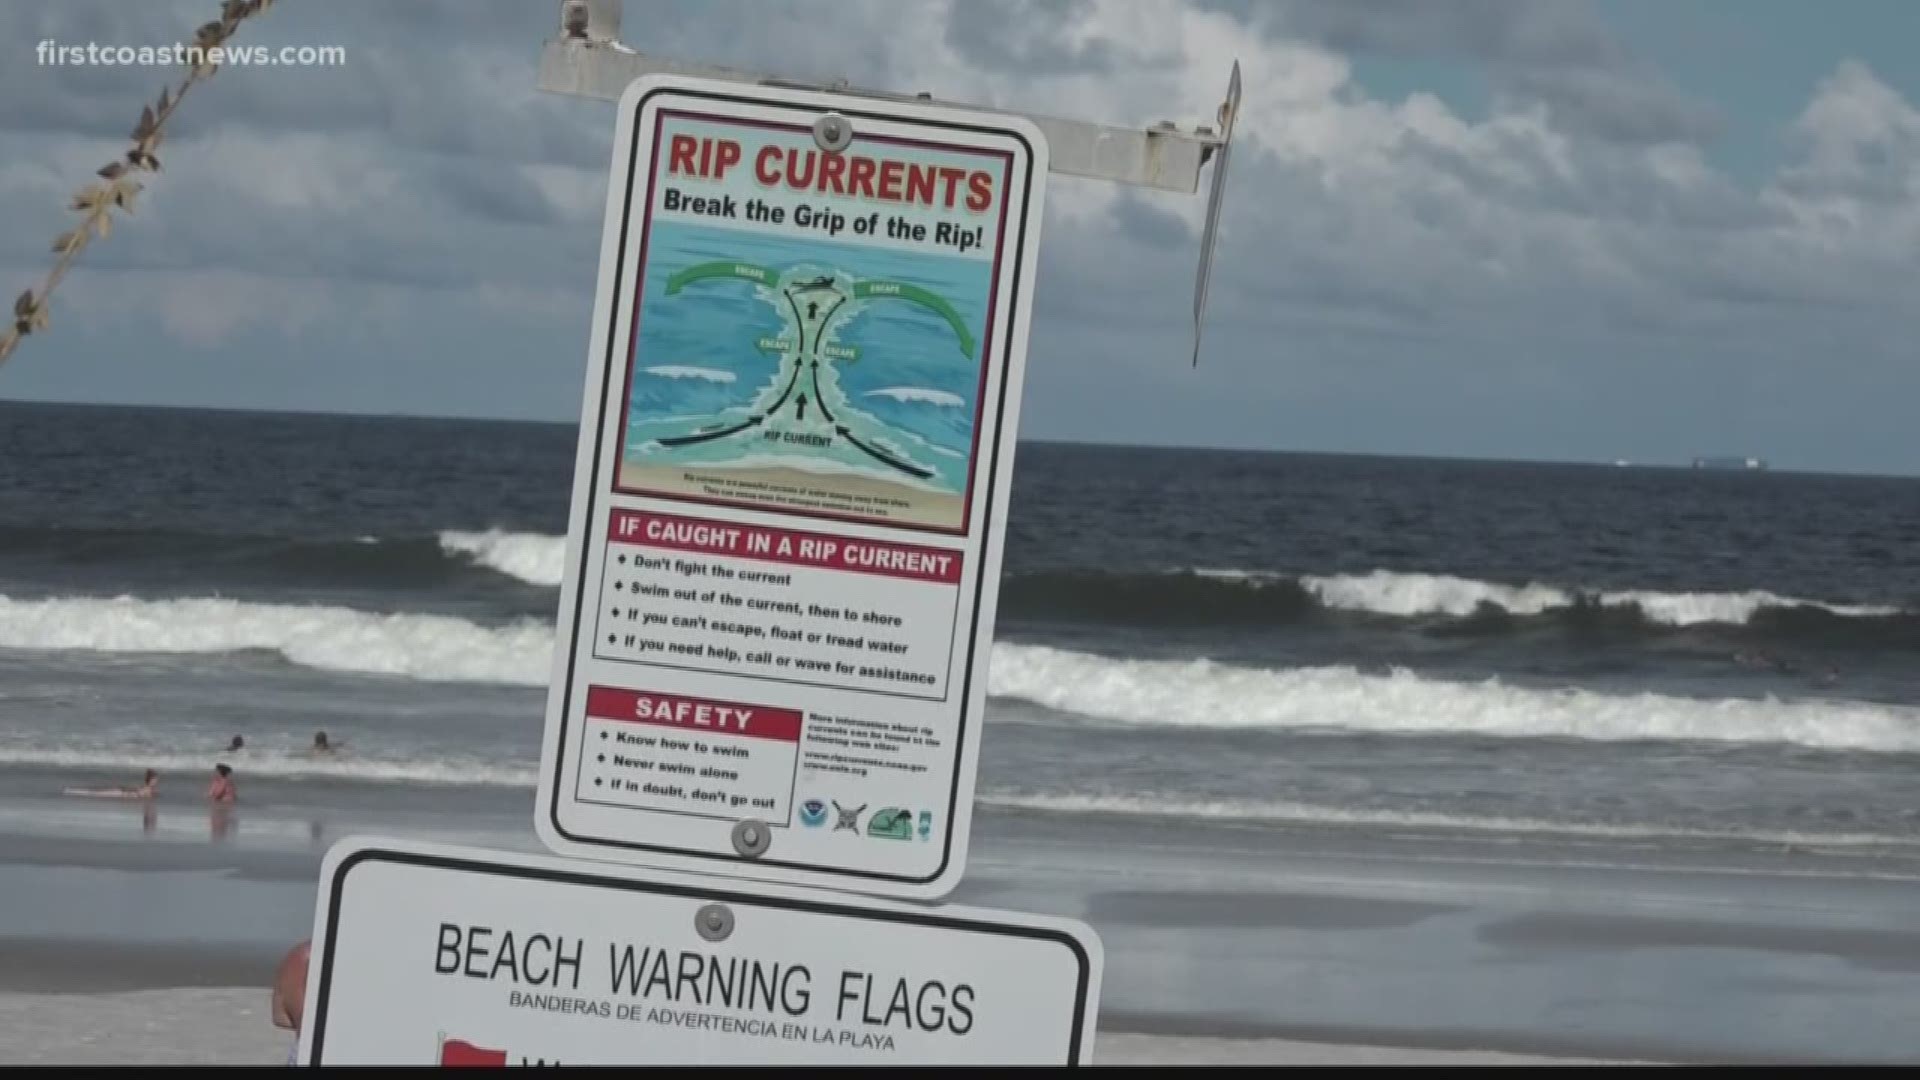 A woman was bitten in the hand by what was likely a small shark in Jacksonville Beach Thursday, according to a Jacksonville Beach lifeguard.